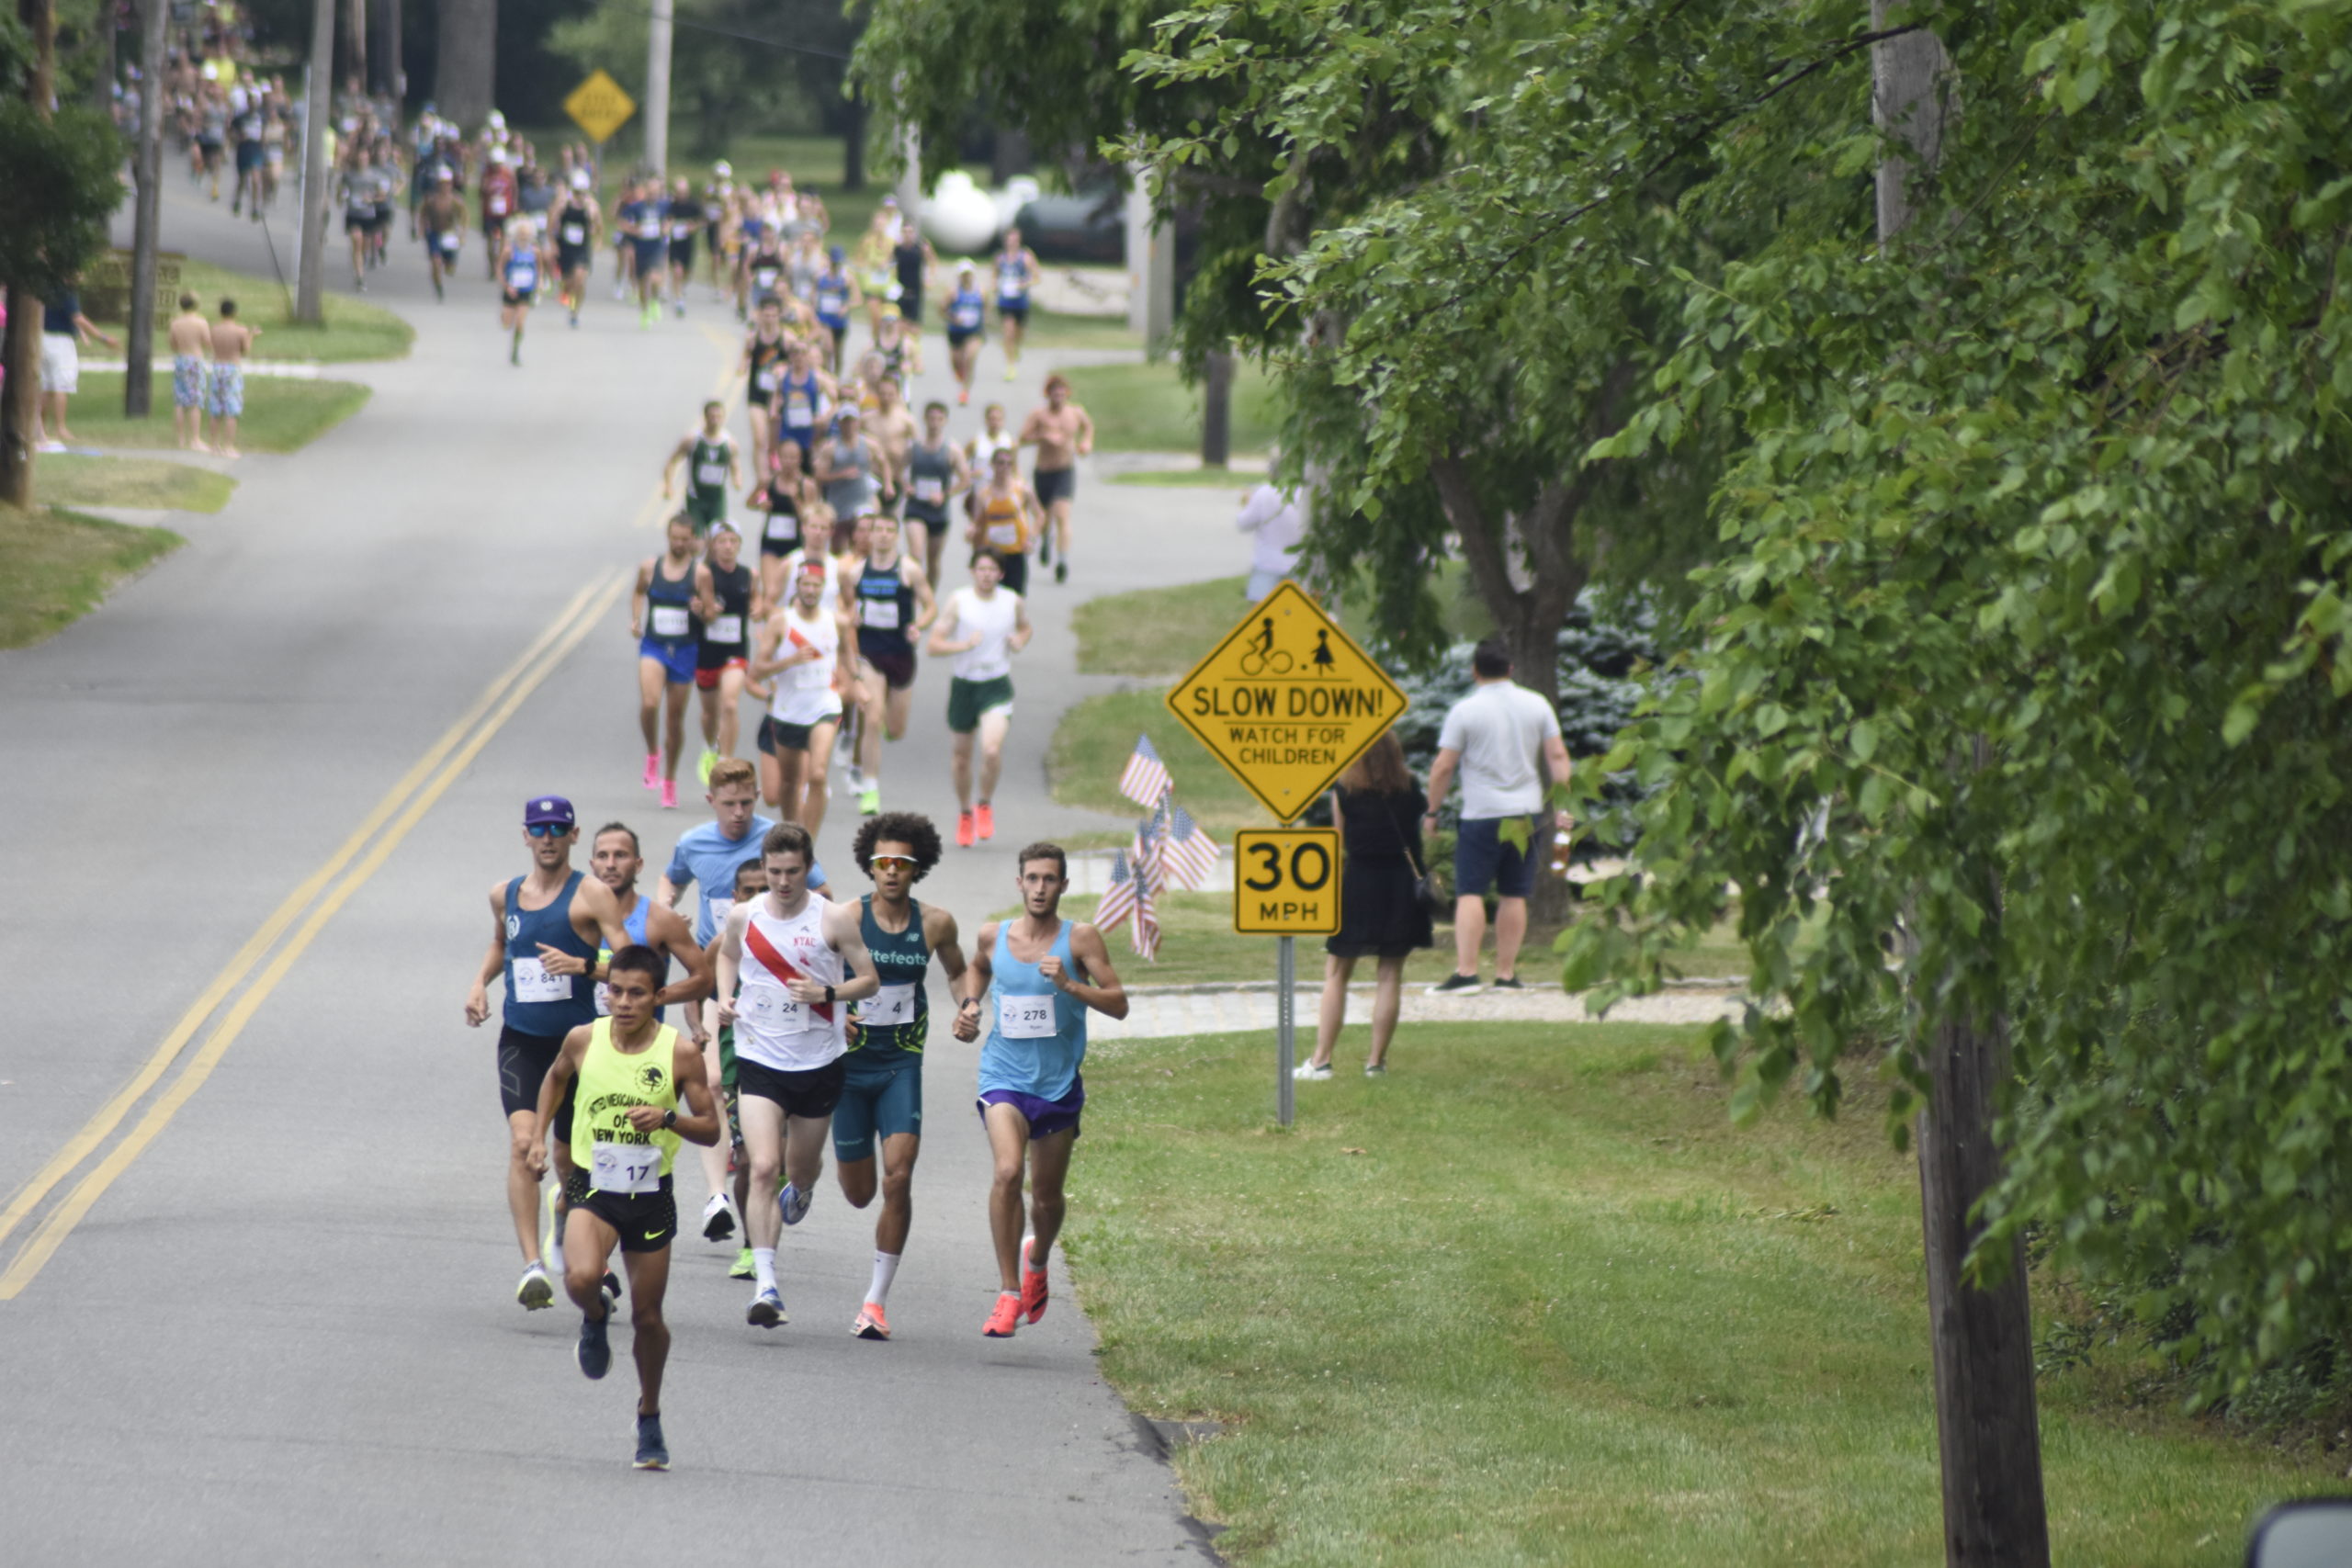 After having just a virtual race last year due to the pandemic, the 42nd annual Shelter Island 10K was done both live and virtually, with around 1,000 runners making the trip to compete on Saturday.